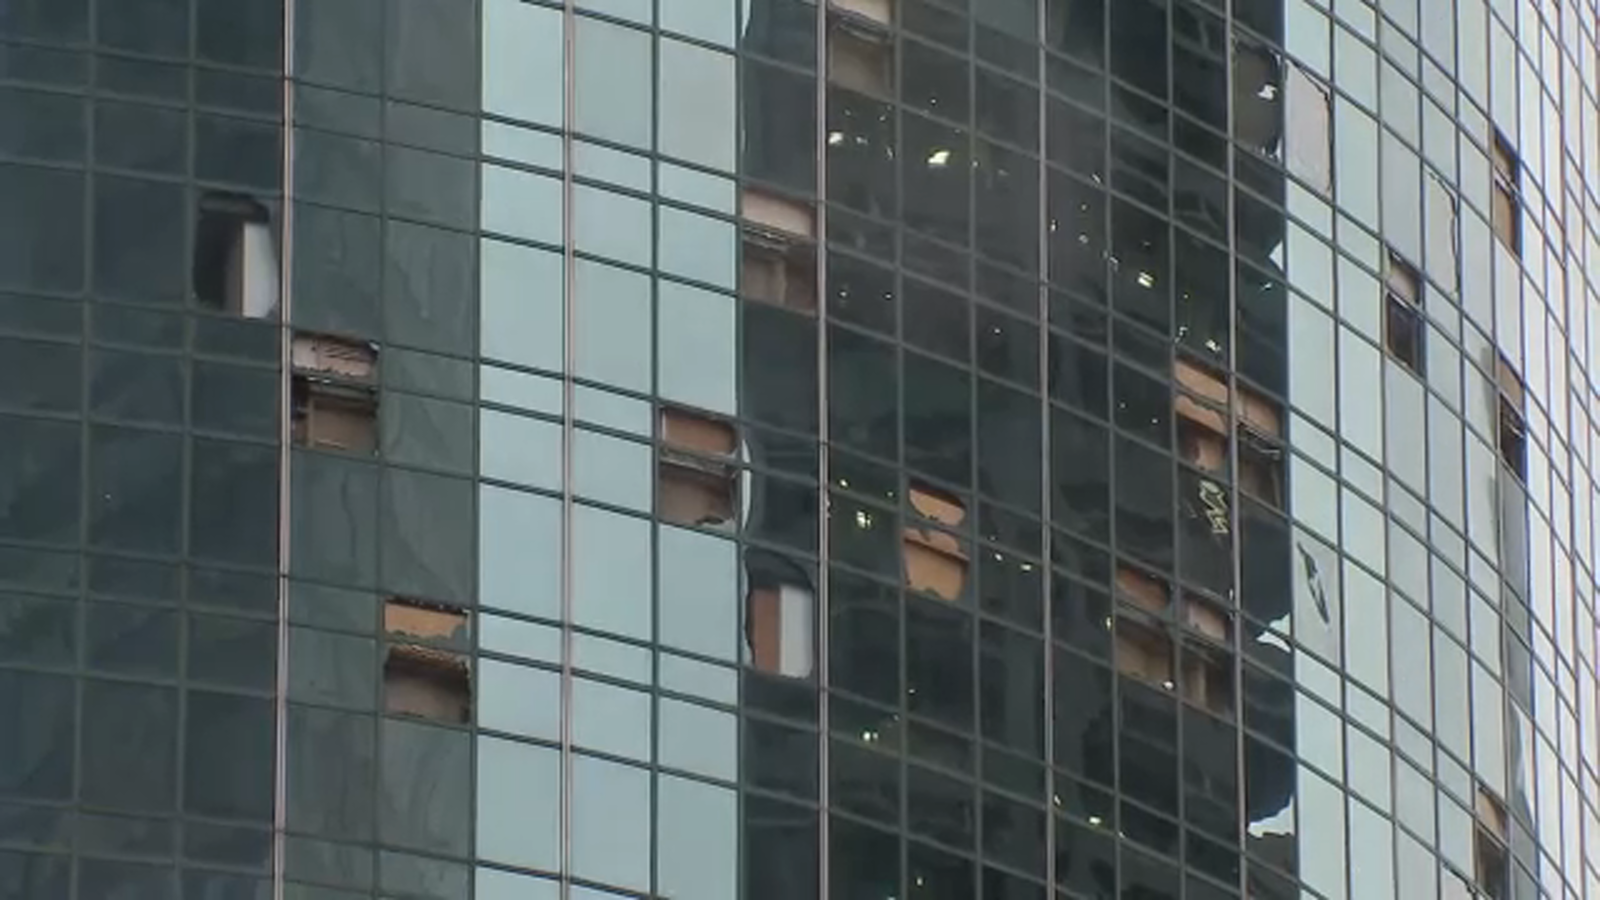 Downtown Houston riddled with glass and other debris after destructive storm tore windows out of high-rise buildings [Video]